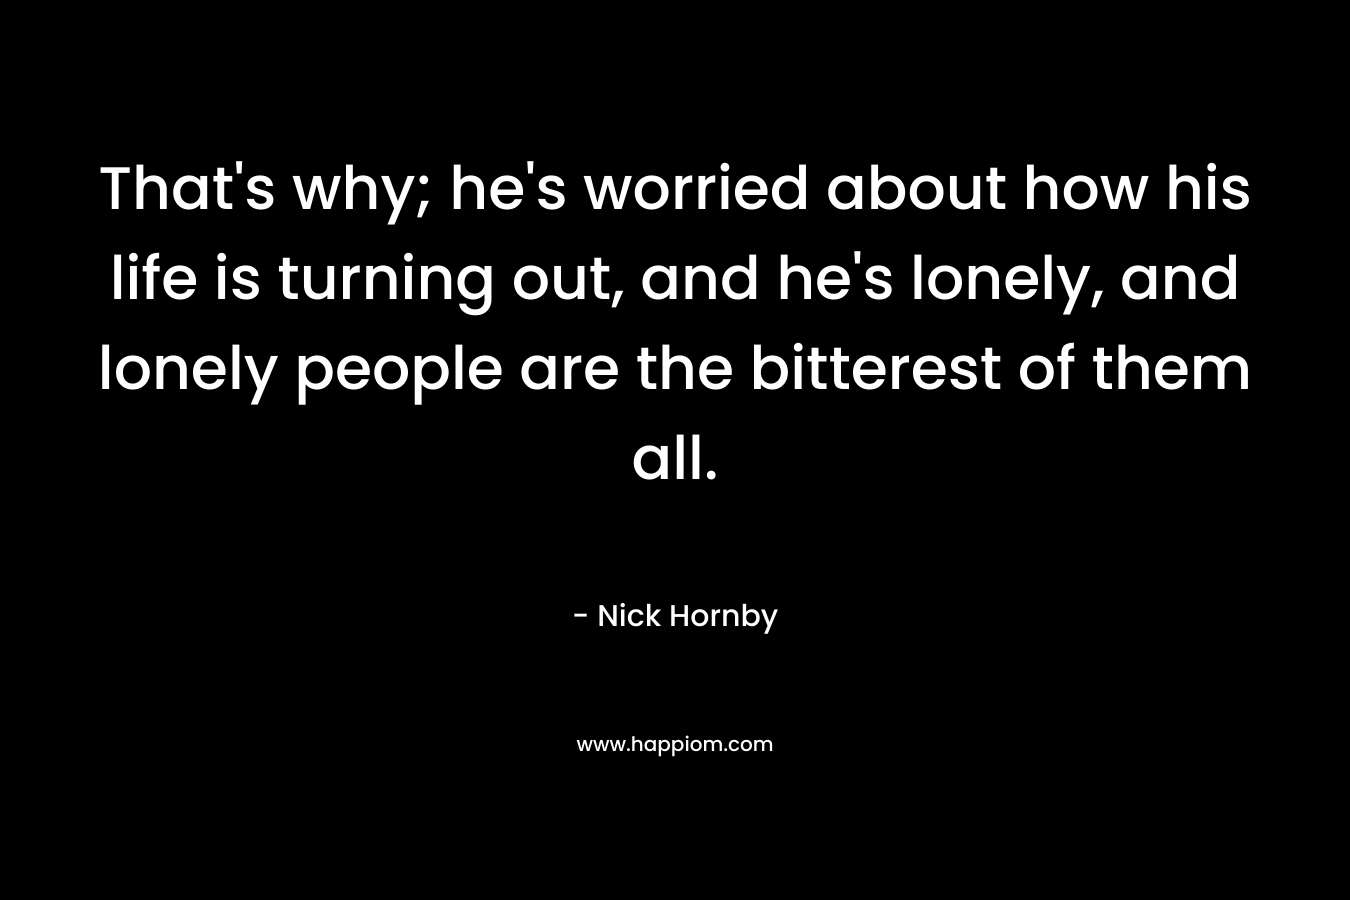 That’s why; he’s worried about how his life is turning out, and he’s lonely, and lonely people are the bitterest of them all. – Nick Hornby